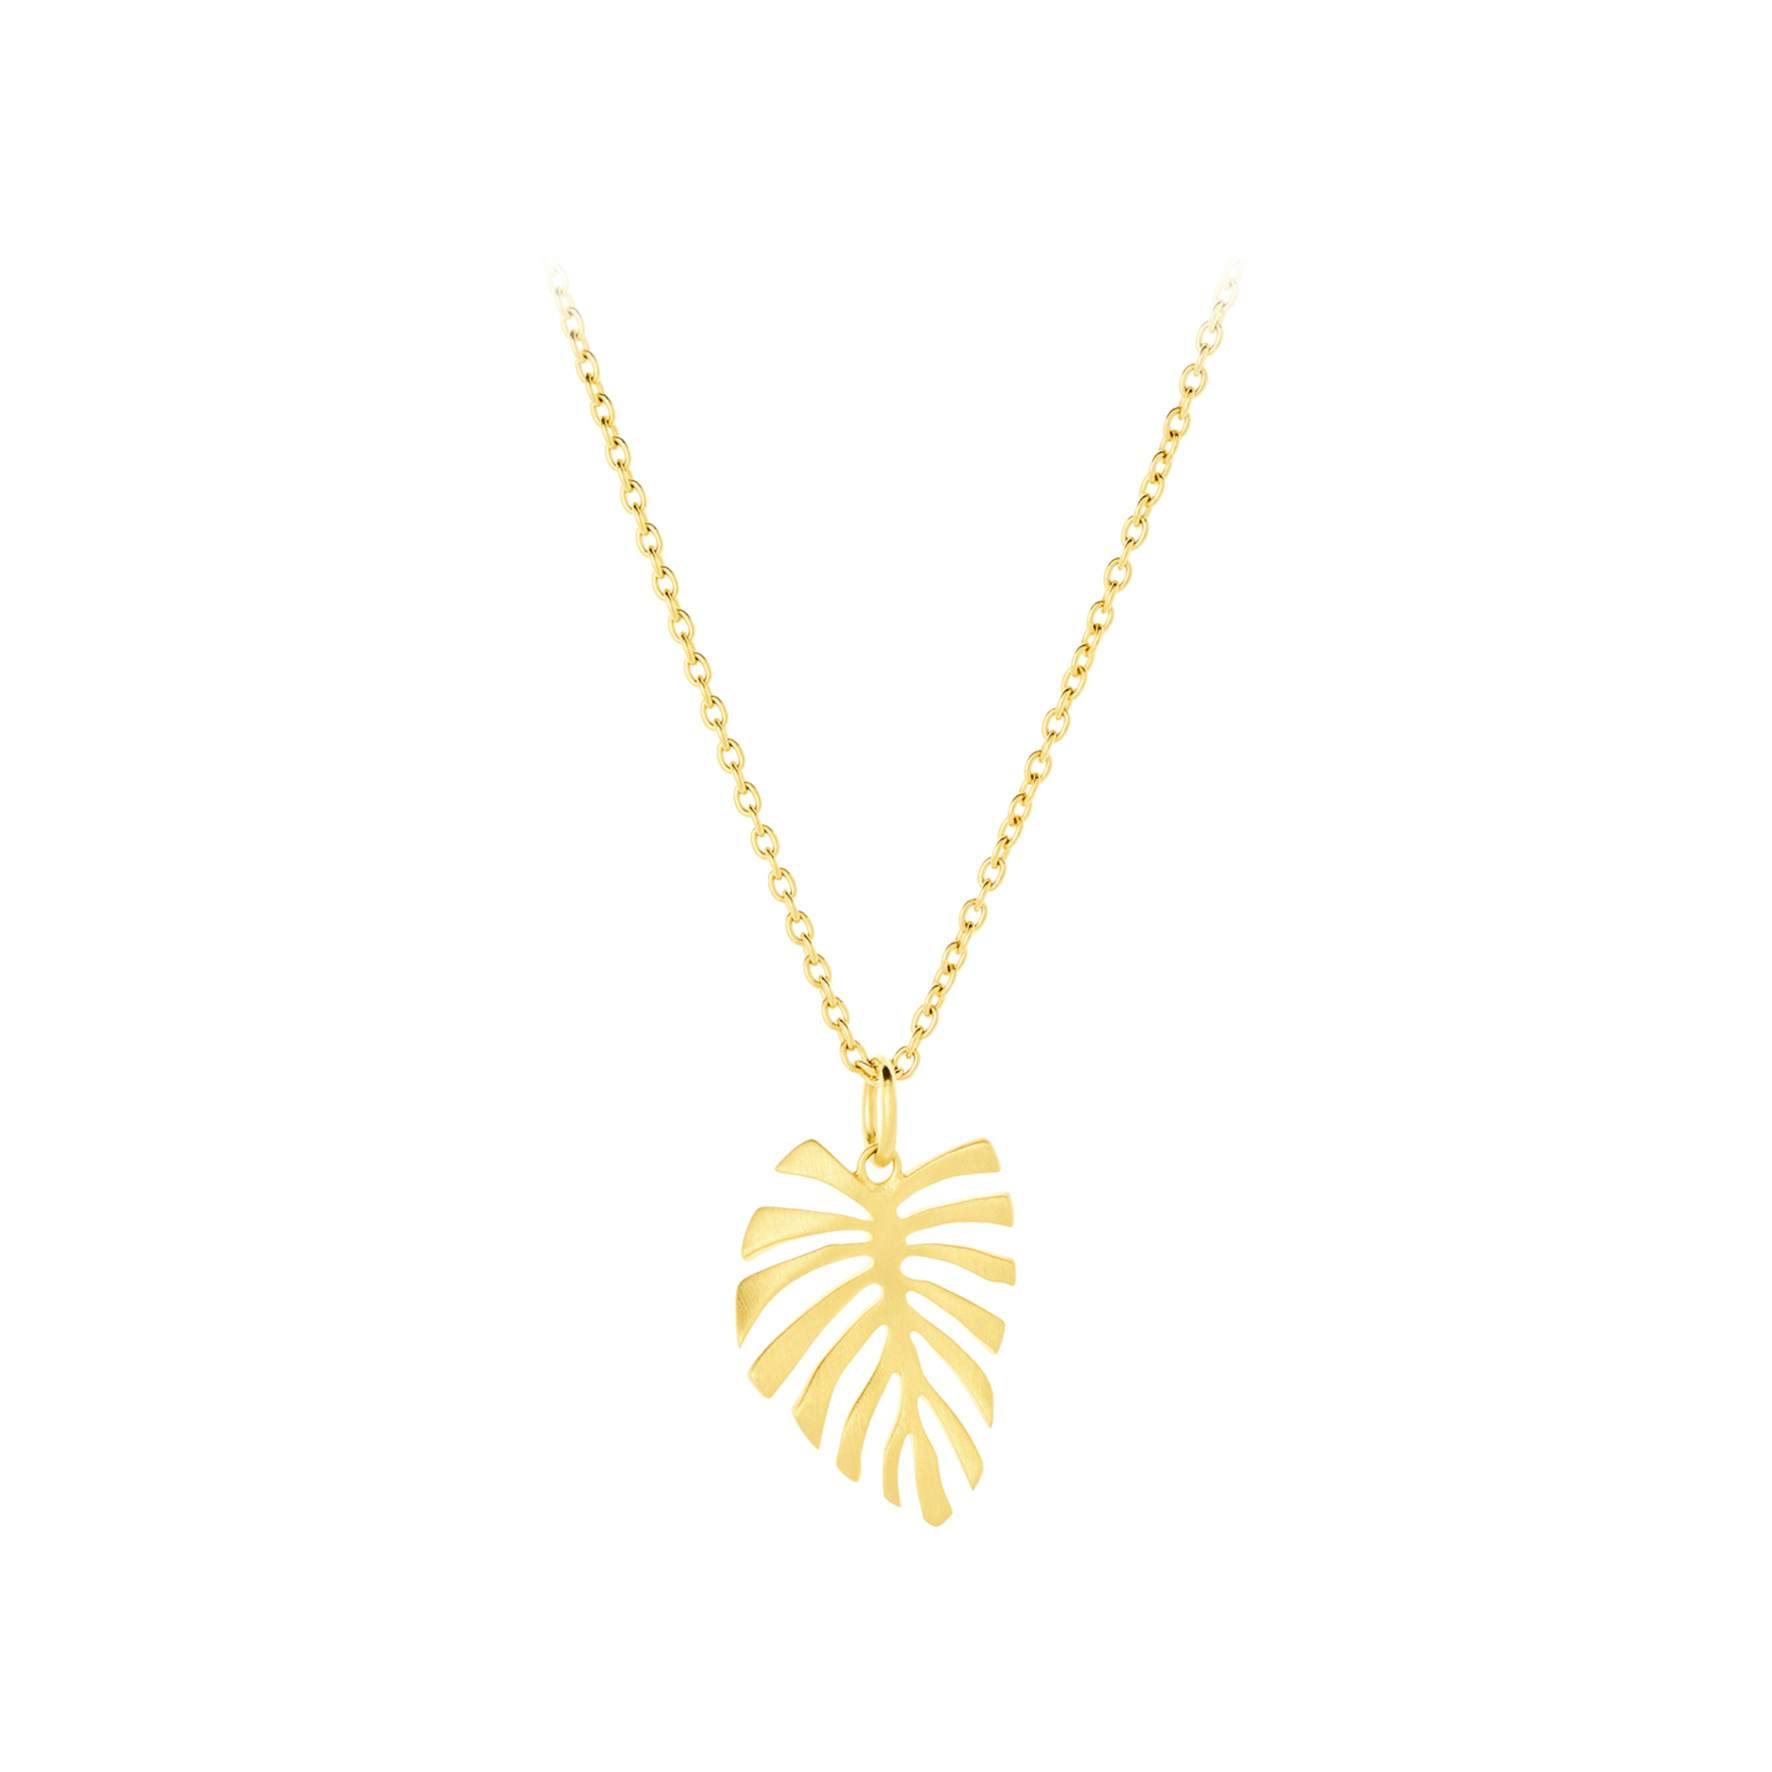 Fern Leaf Necklace from Pernille Corydon in Goldplated-Silver Sterling 925